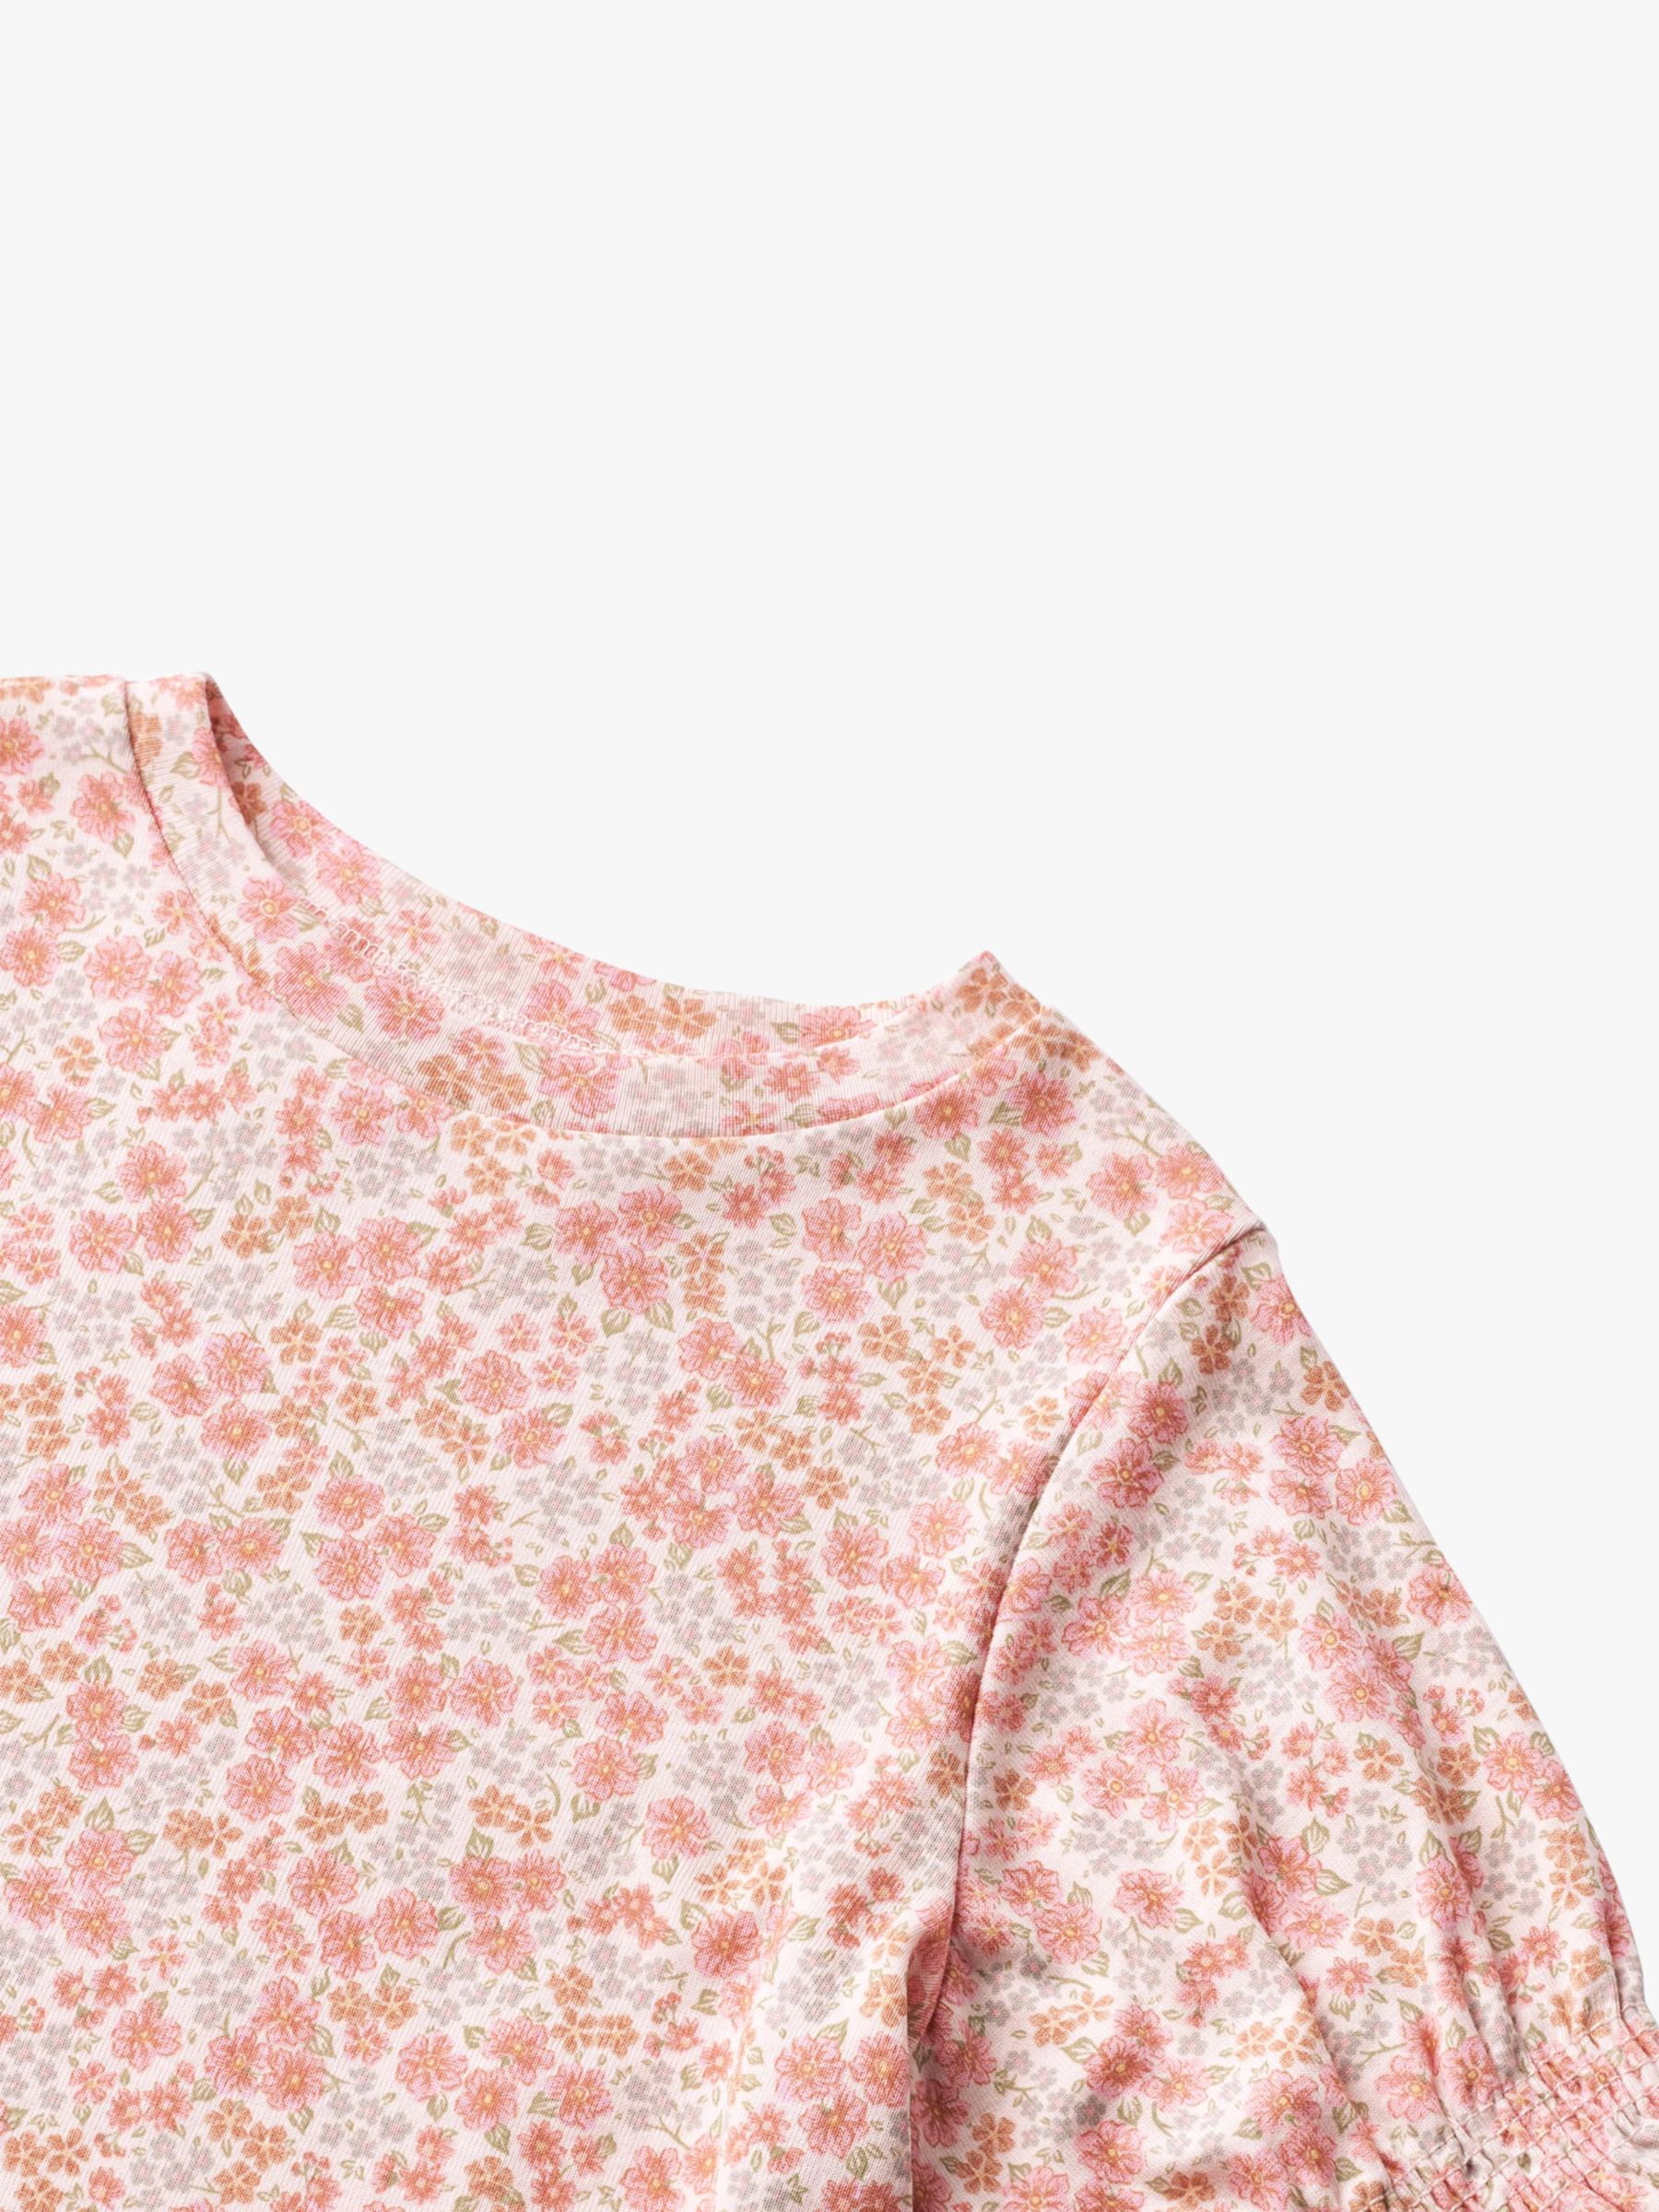 WHEAT Kids' Norma Floral Print Top, Pink, 3 years